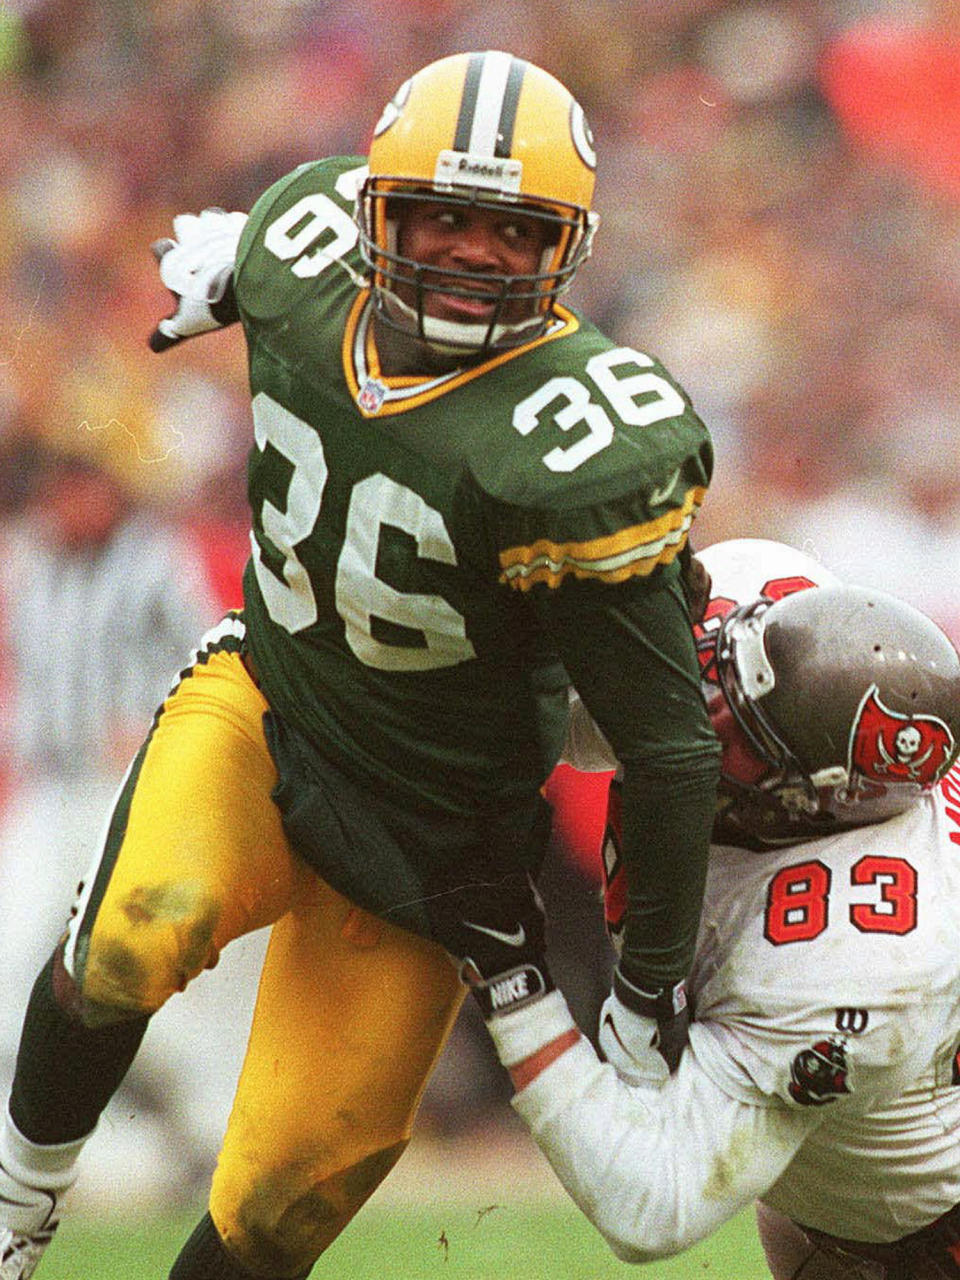 FILE - In this Jan. 4, 1998 file photo, Green Bay Packers strong safety LeRoy Butler moves in against the Tampa Bay Buccaneers during the NFC Divisional Playoffs in Green Bay, Wis. Butler was selected as a finalist for the Pro Football Hall of Fame's class of 2021 on Tuesday, Jan. 5, 2021 (.AP Photo/Charles Krupa, File)